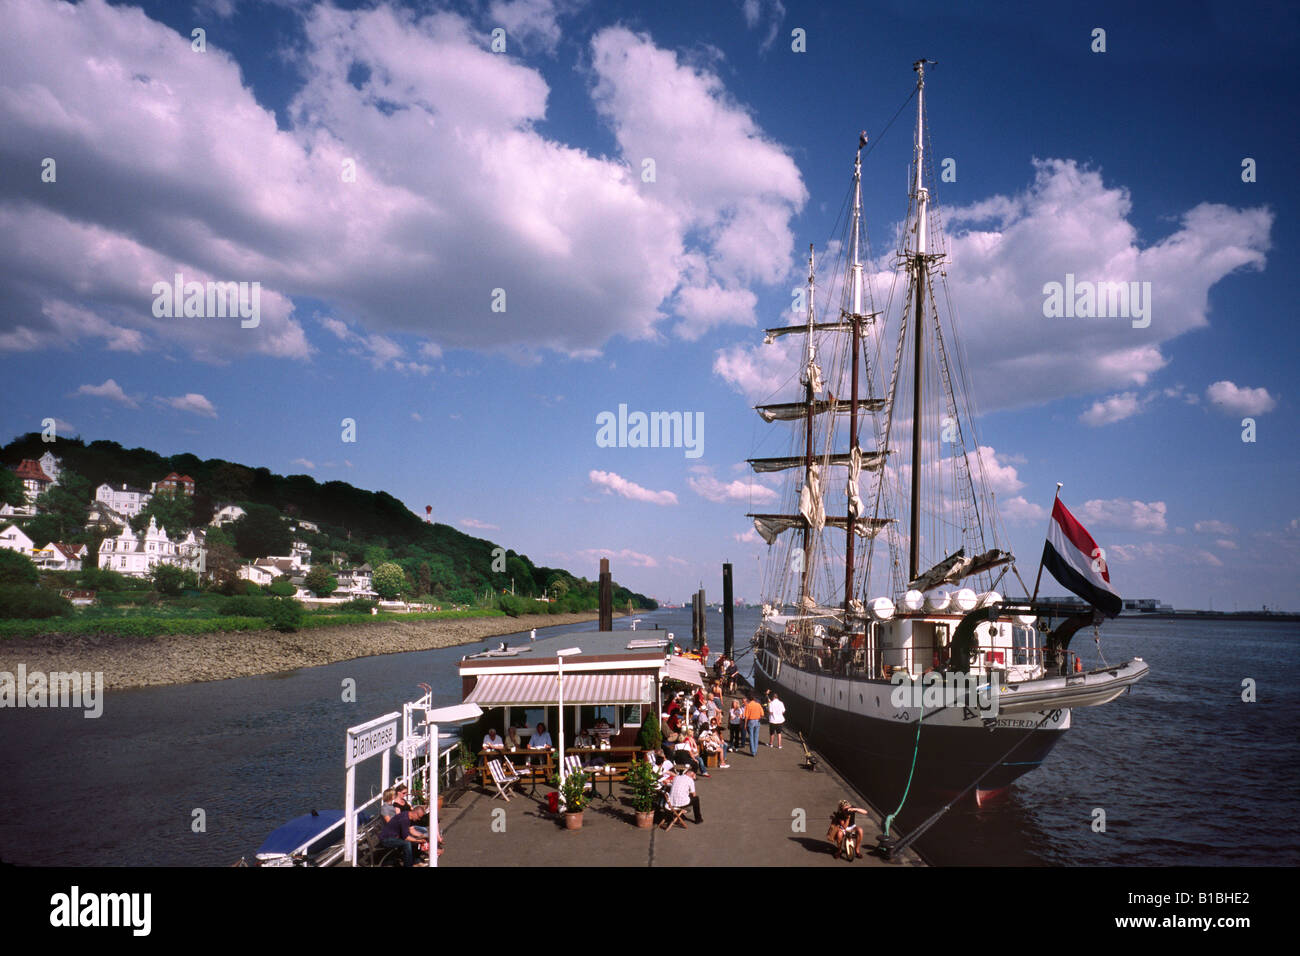 May 11, 2008 - Dutch barquentine Atlantis at Blankenese ferry pier in the German city of Hamburg. Stock Photo